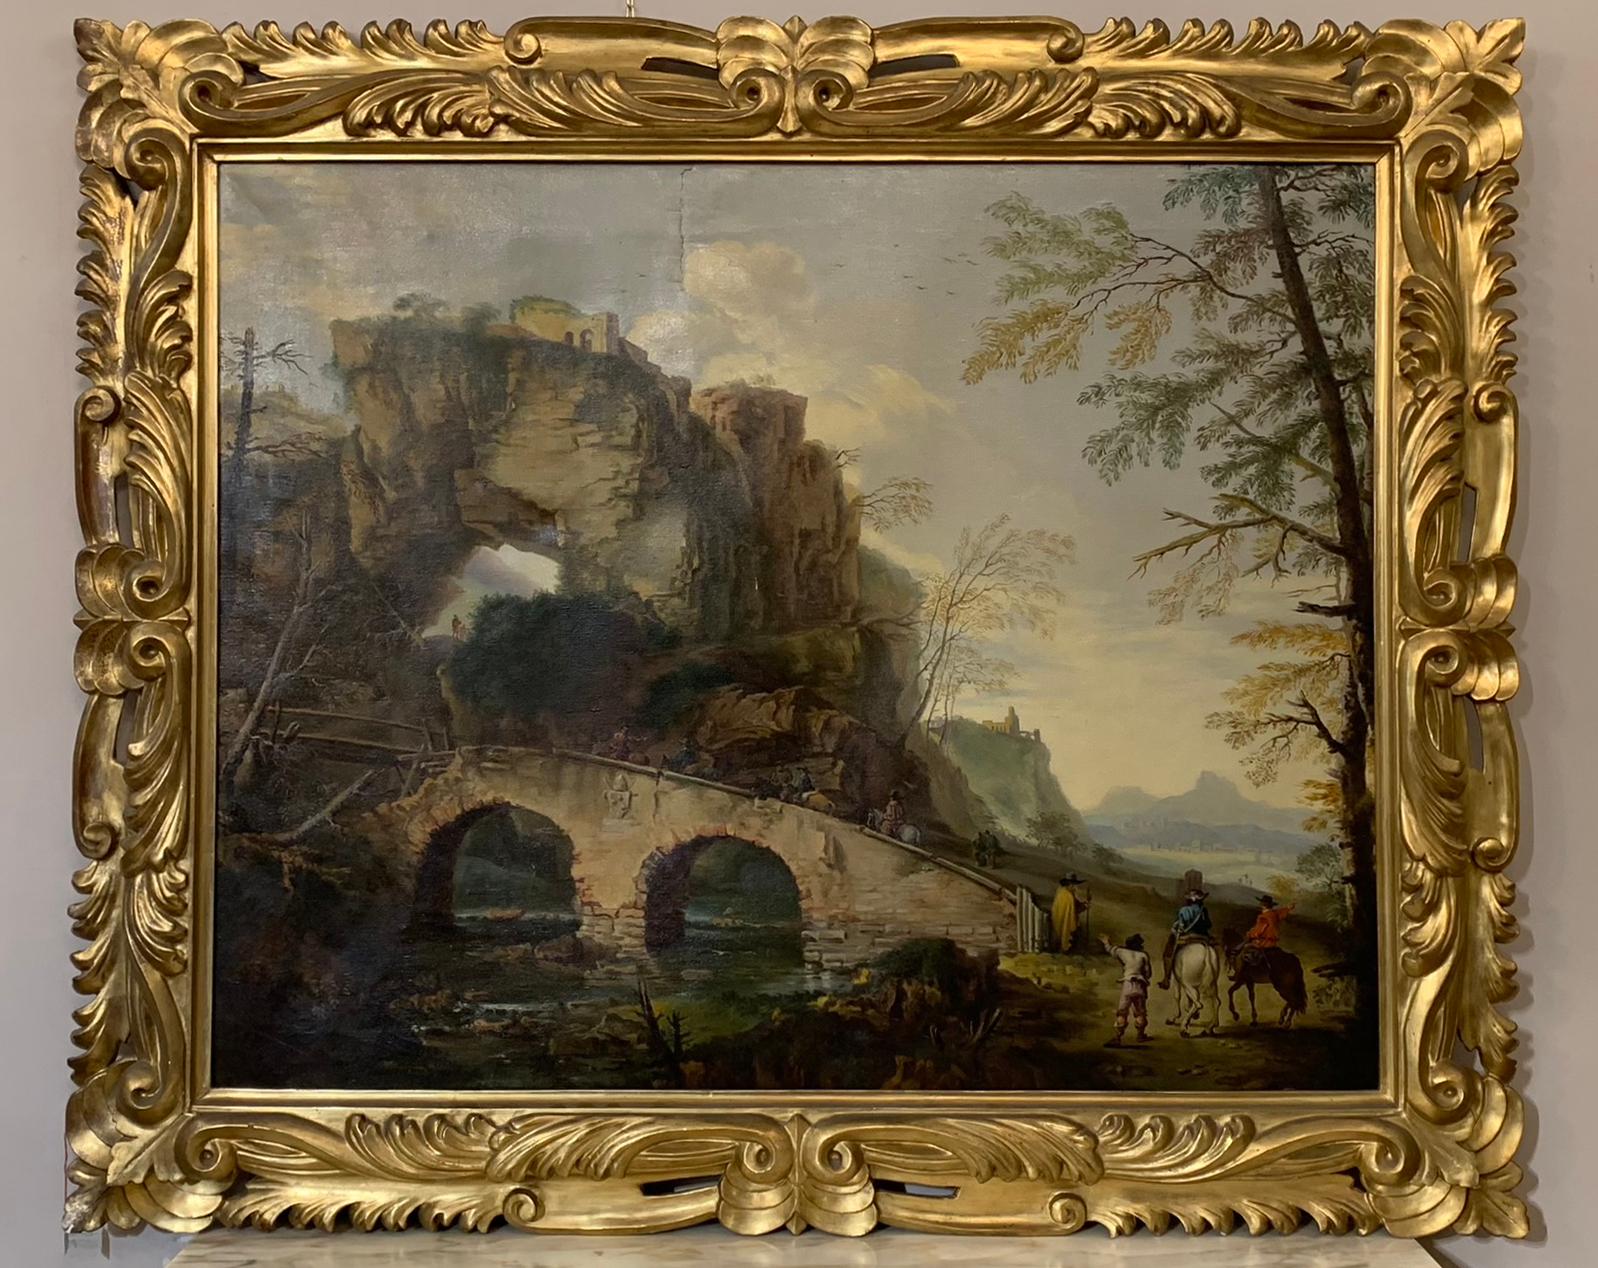 Beautiful oil painting on canvas, depicting travelers on horseback visiting the Tivoli Rock, passing over an ancient bridge that was destroyed and restored with a wooden substructure. The style of the painting takes up the subjects of the famous